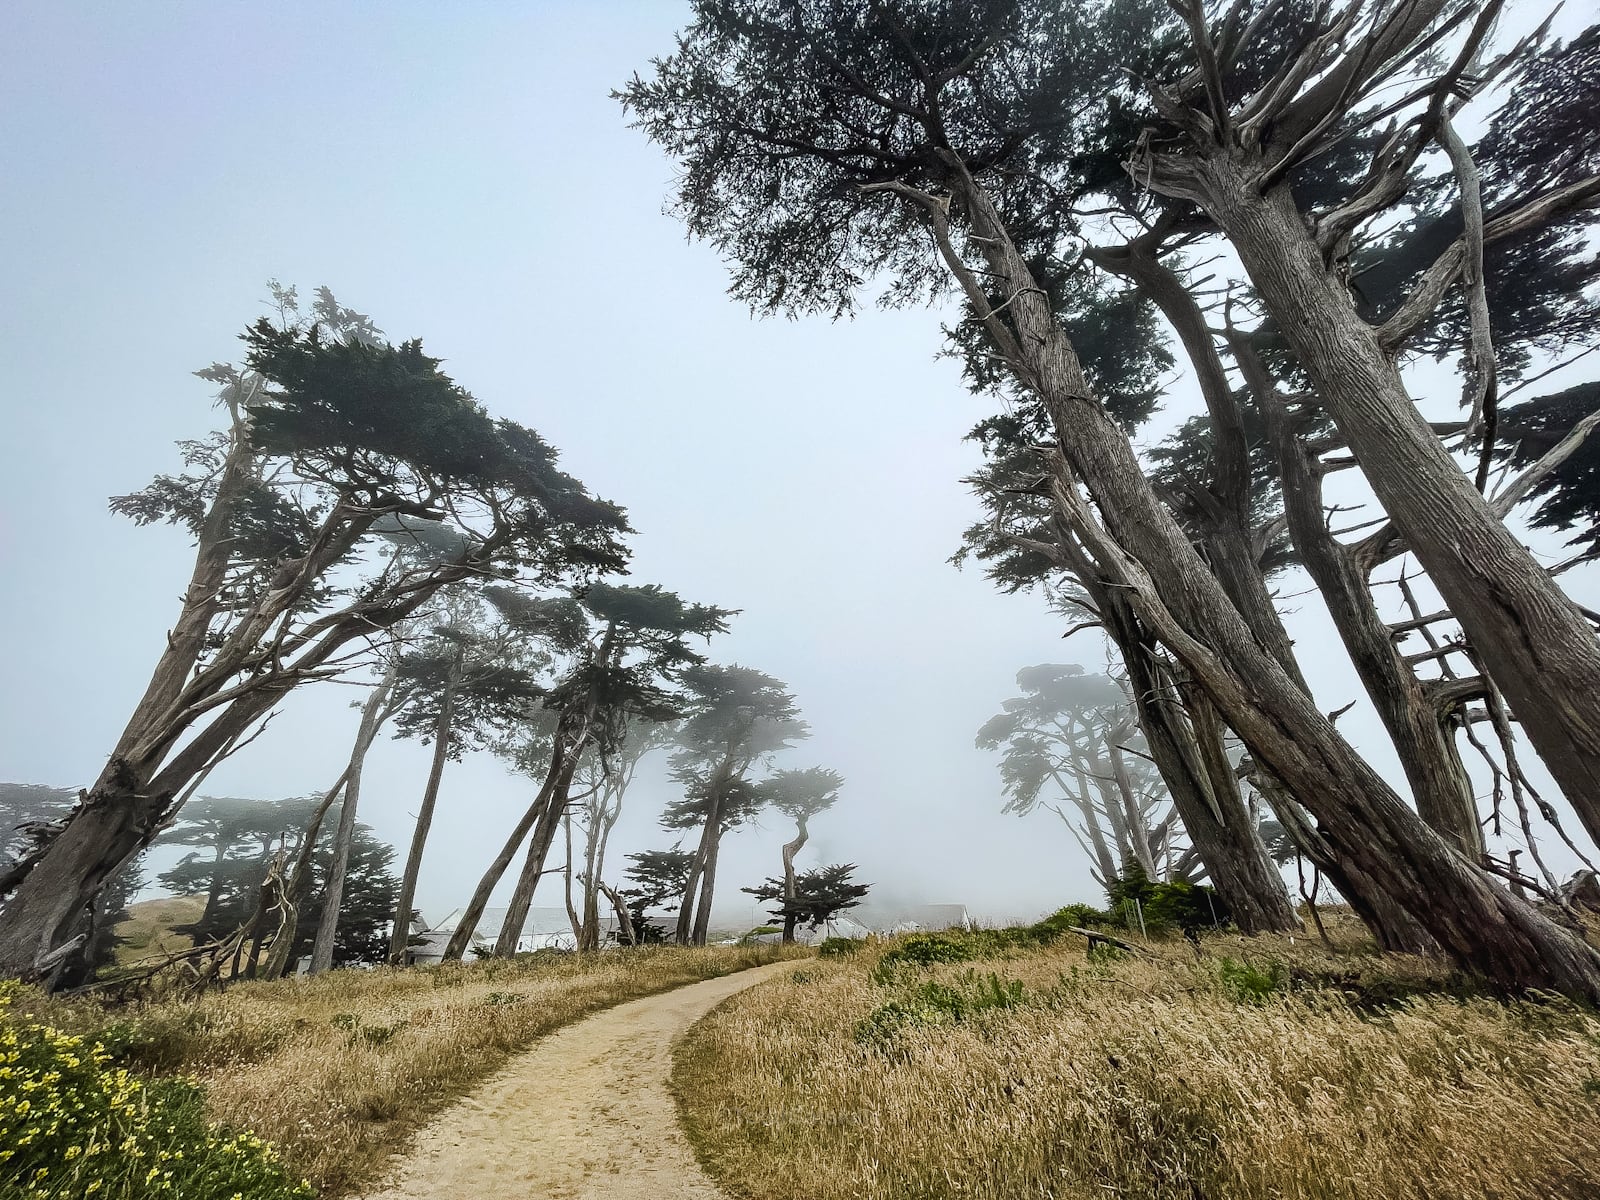 Cypress trees at the start of Tomales Point Trail